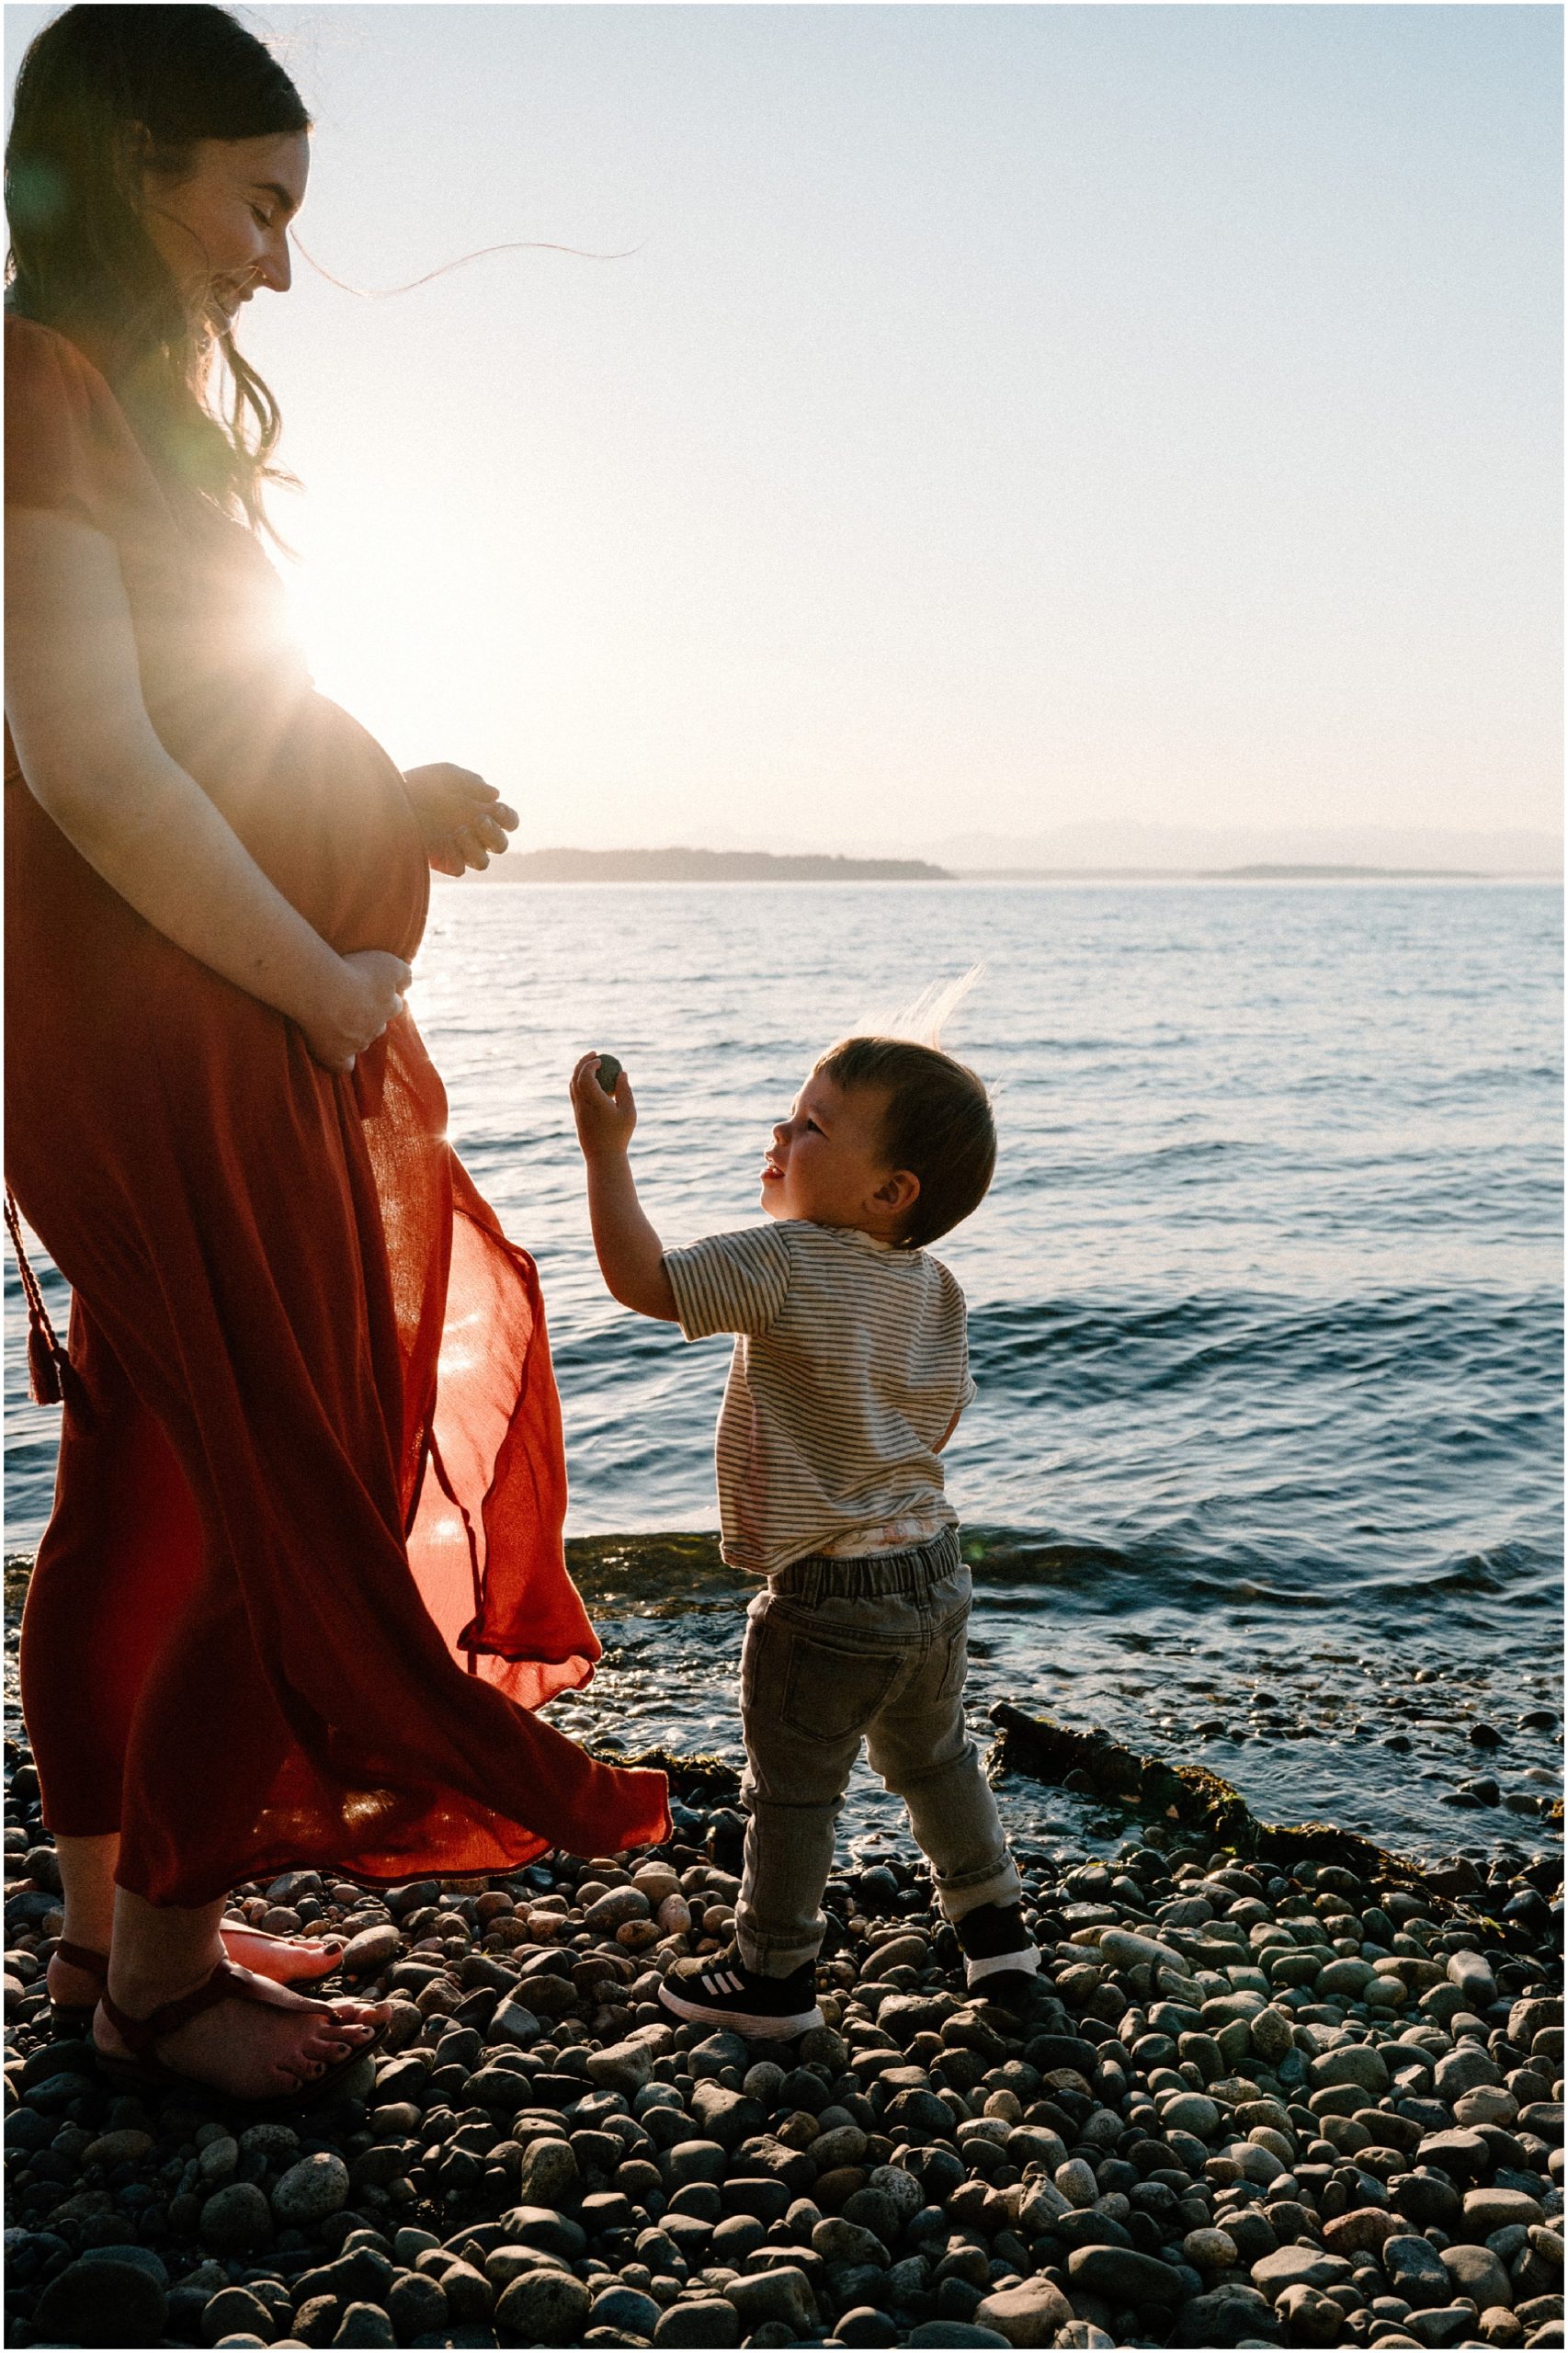 Little boy hands his mom a rock to skip on the lake. Photo by Meg Newton Photography.